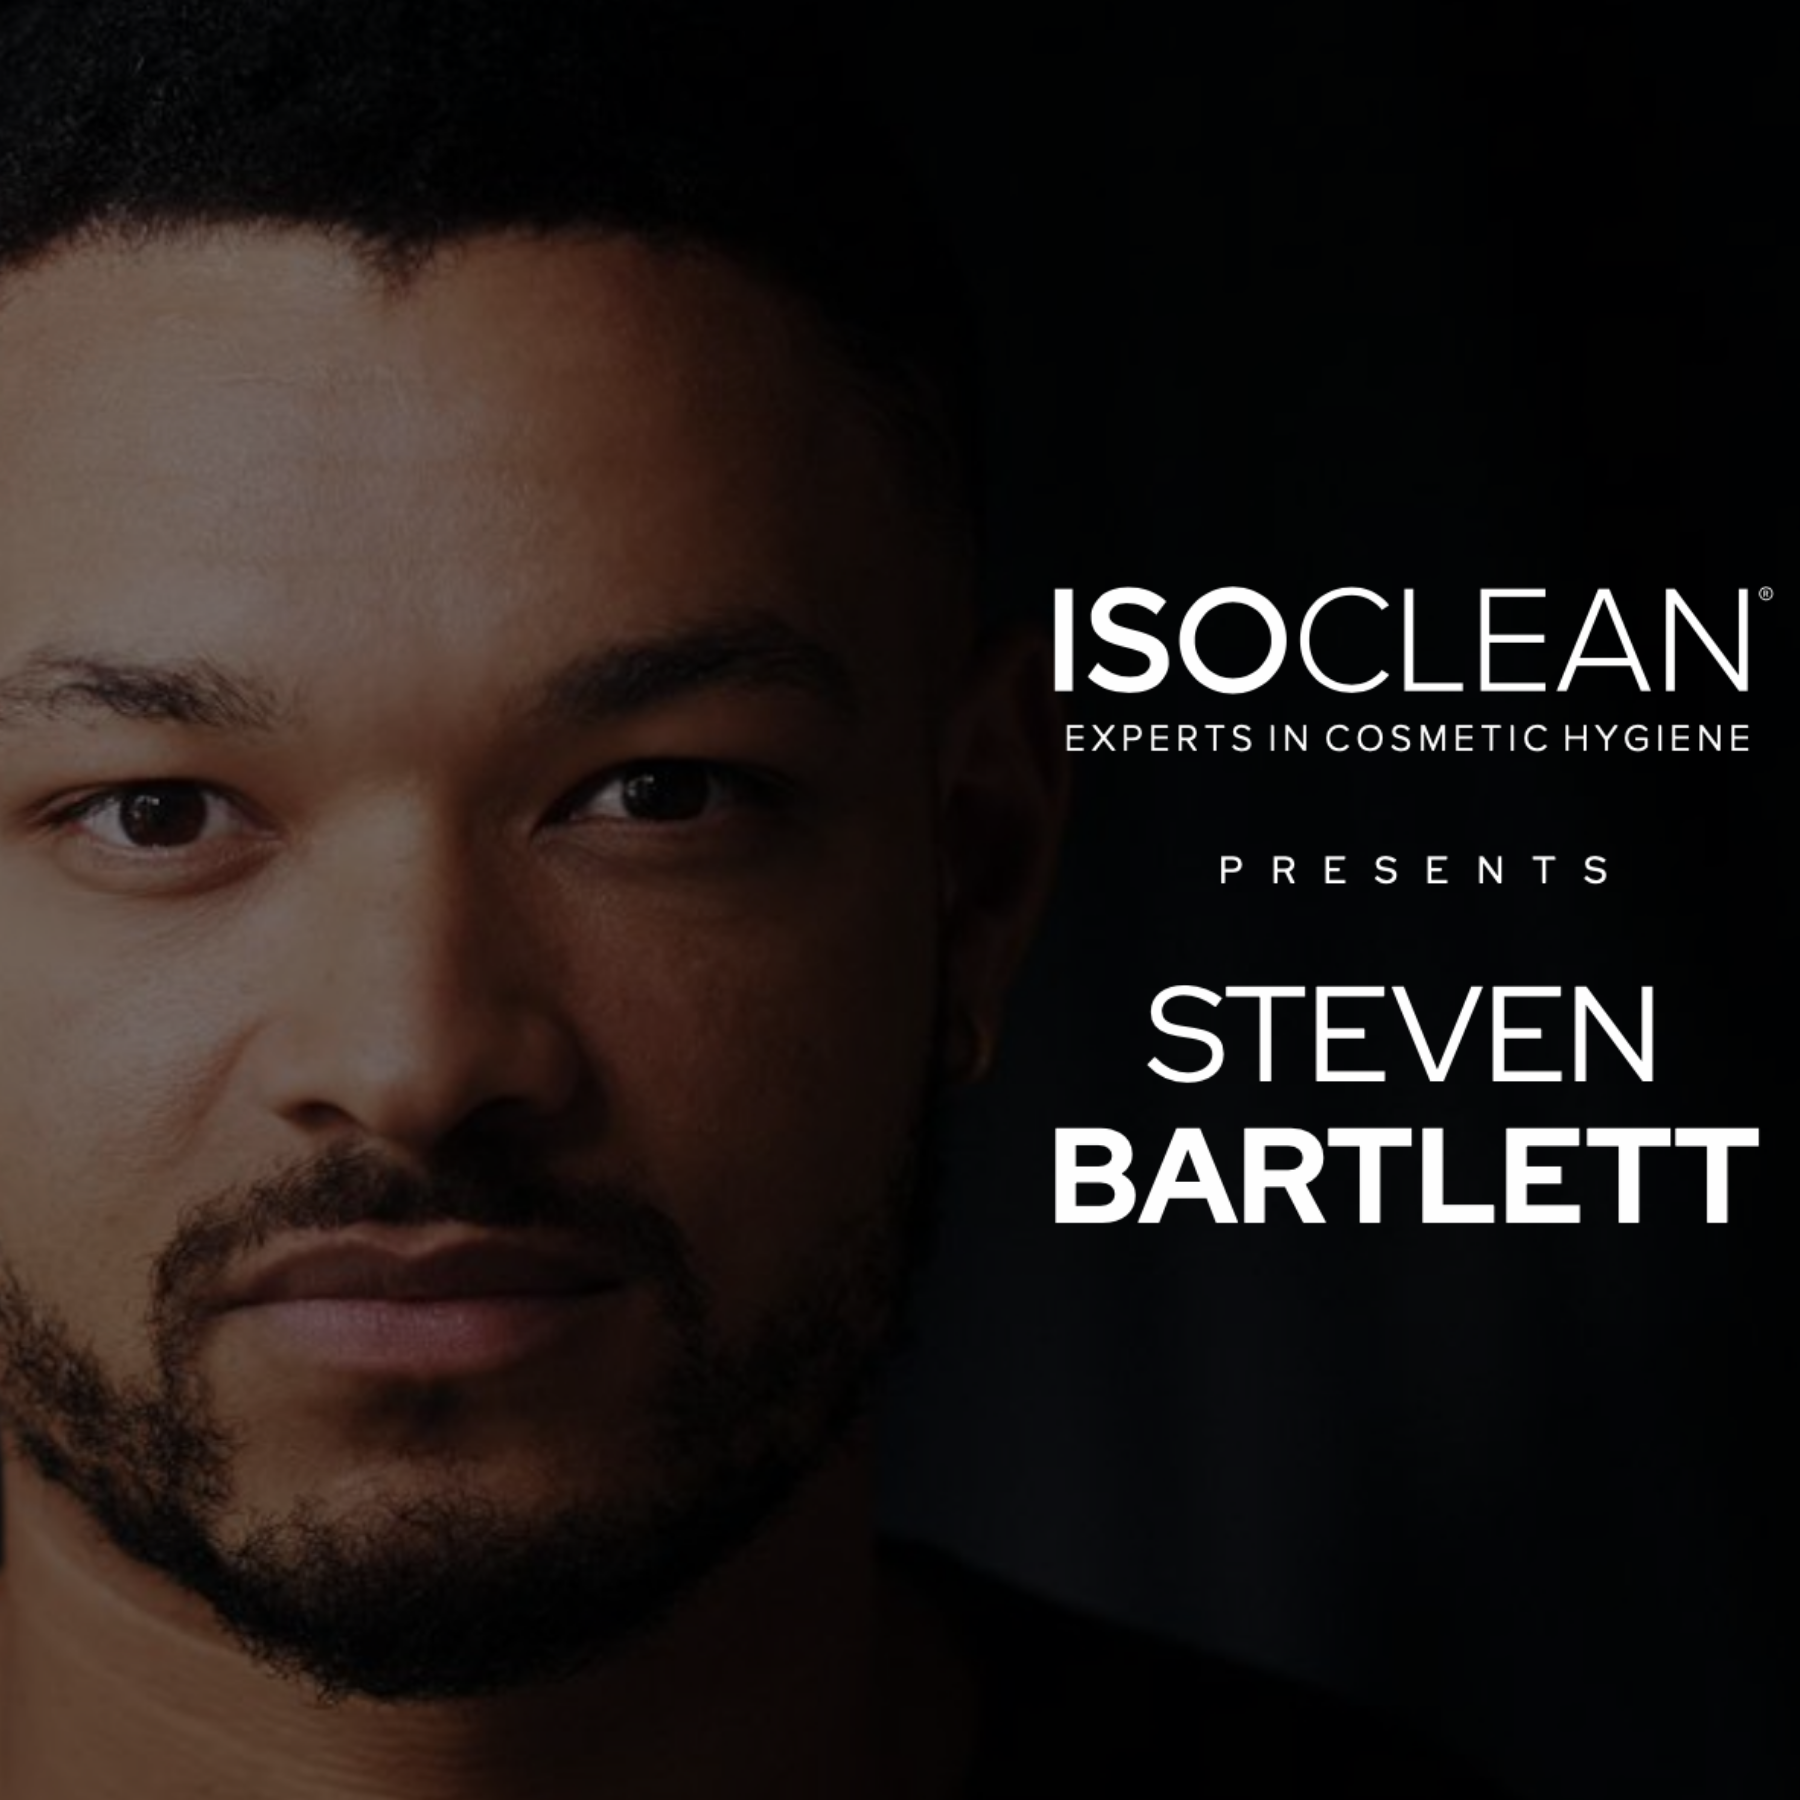 A Glam evening at the ISOCLEAN event with Dragons' Den star Steve Bartlett